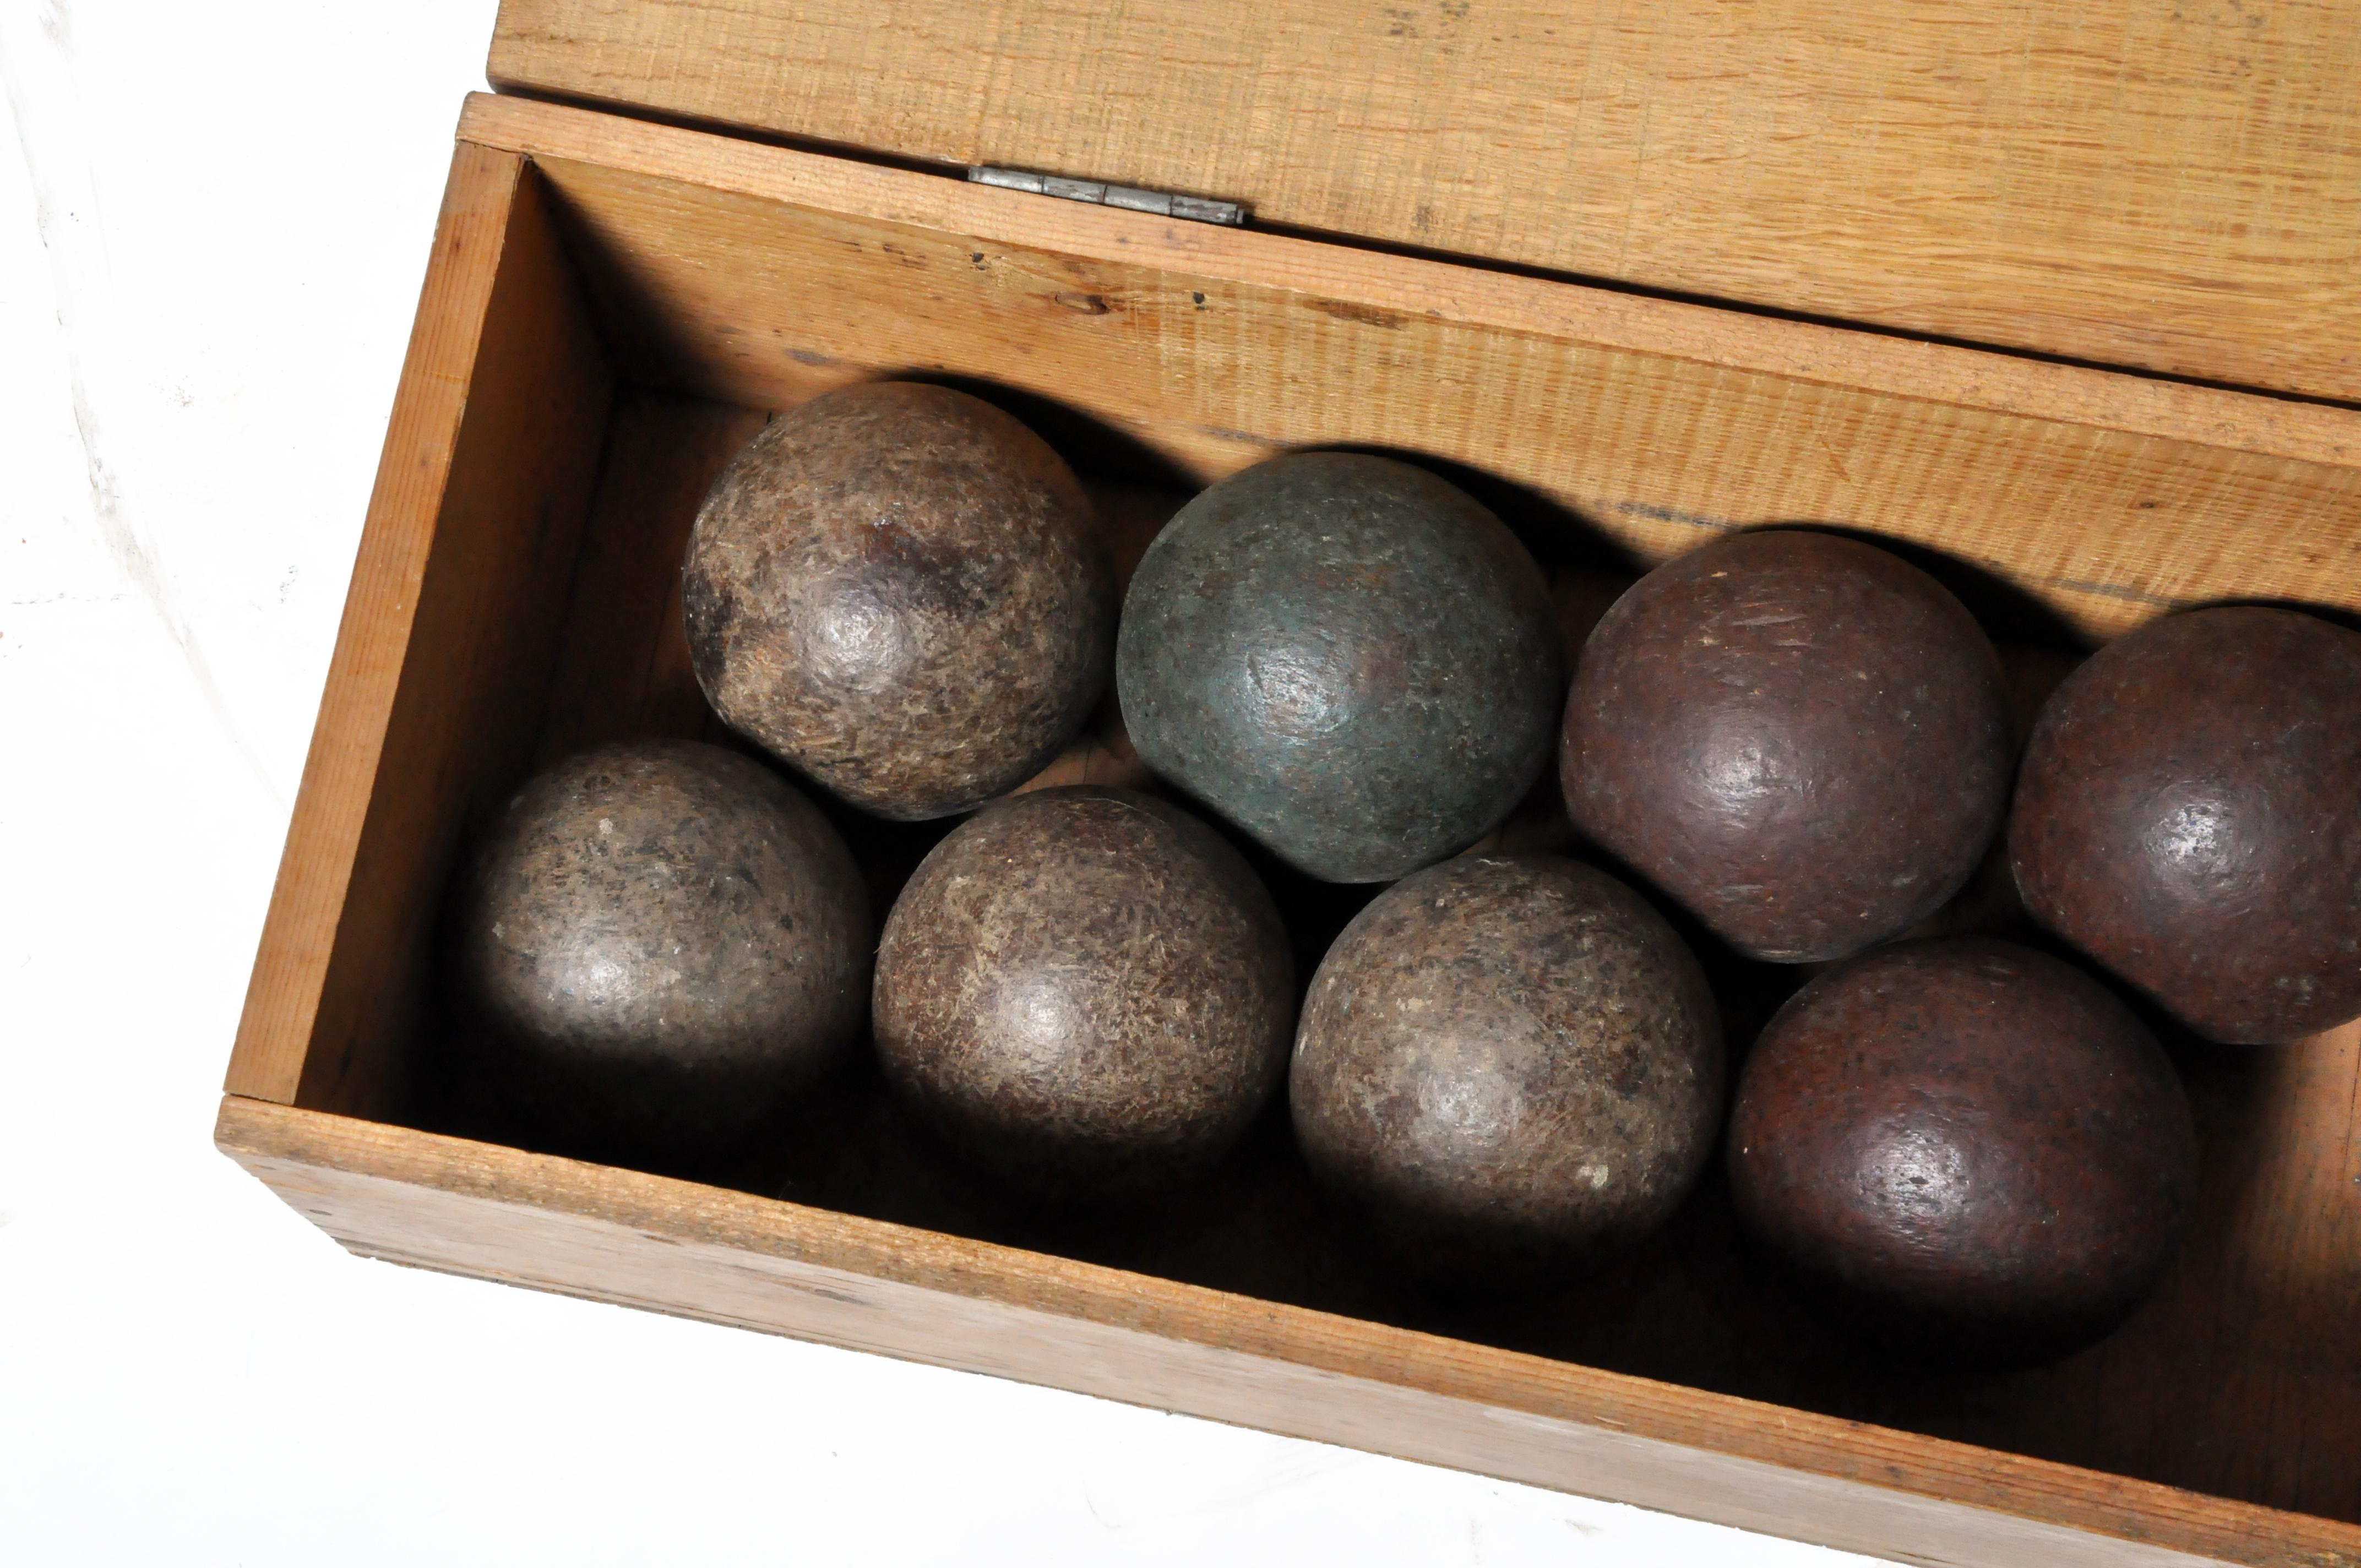 This set of 13 bocce balls a wooden box was acquired in France and most likely dates to the late 20th century. Box is included. Wear consistent with age and use.
 